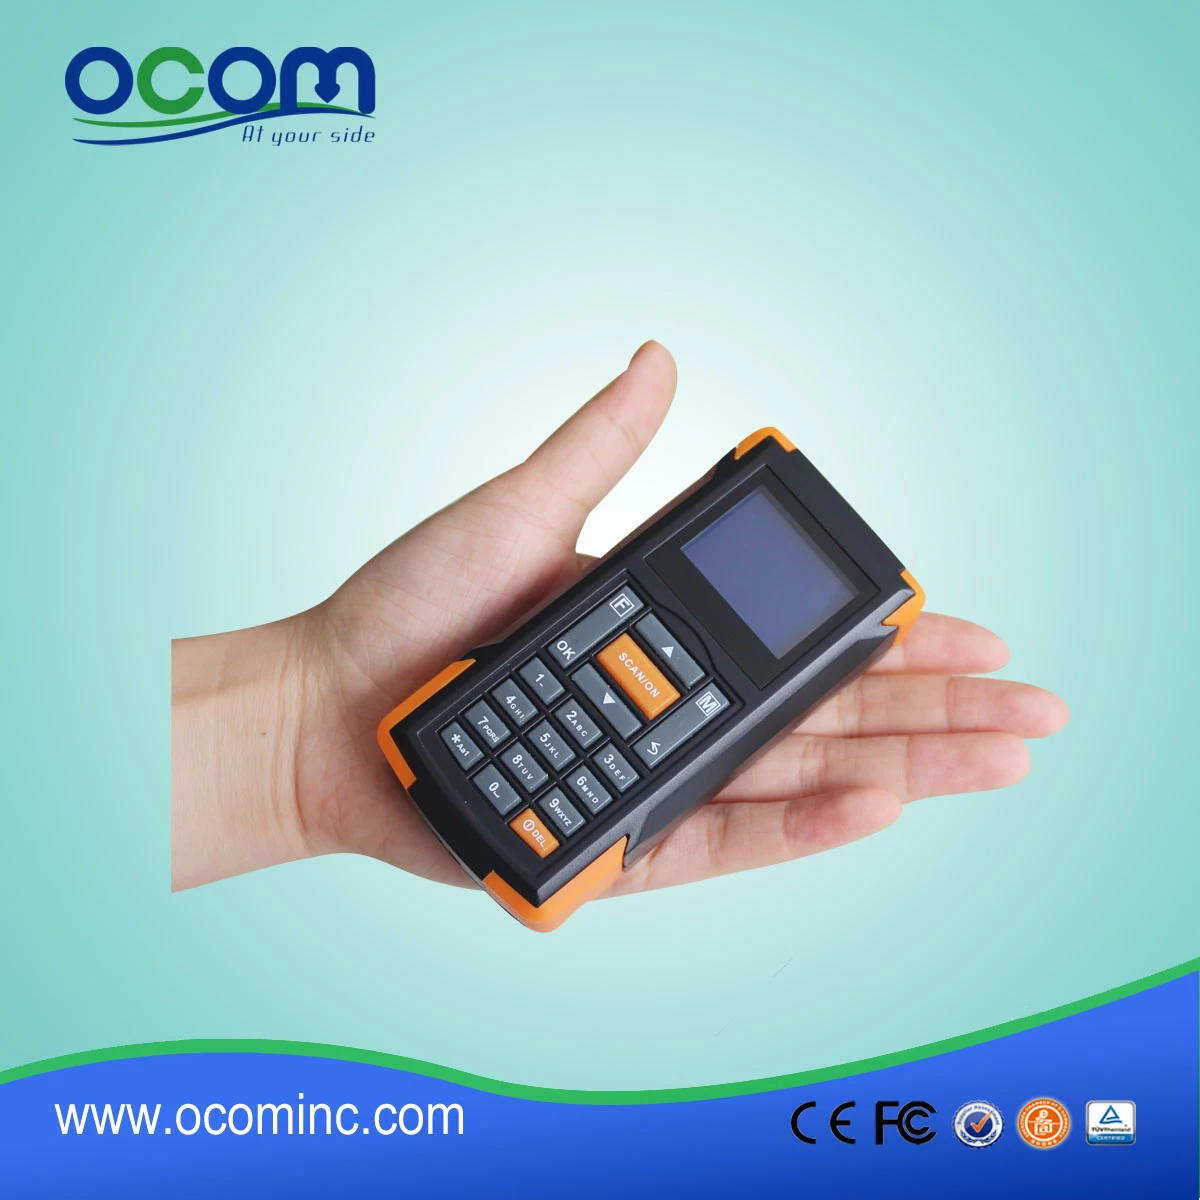 (OCBS-D005) 433Mhz Mini Wireless Barcode Scanner with Display and Memory